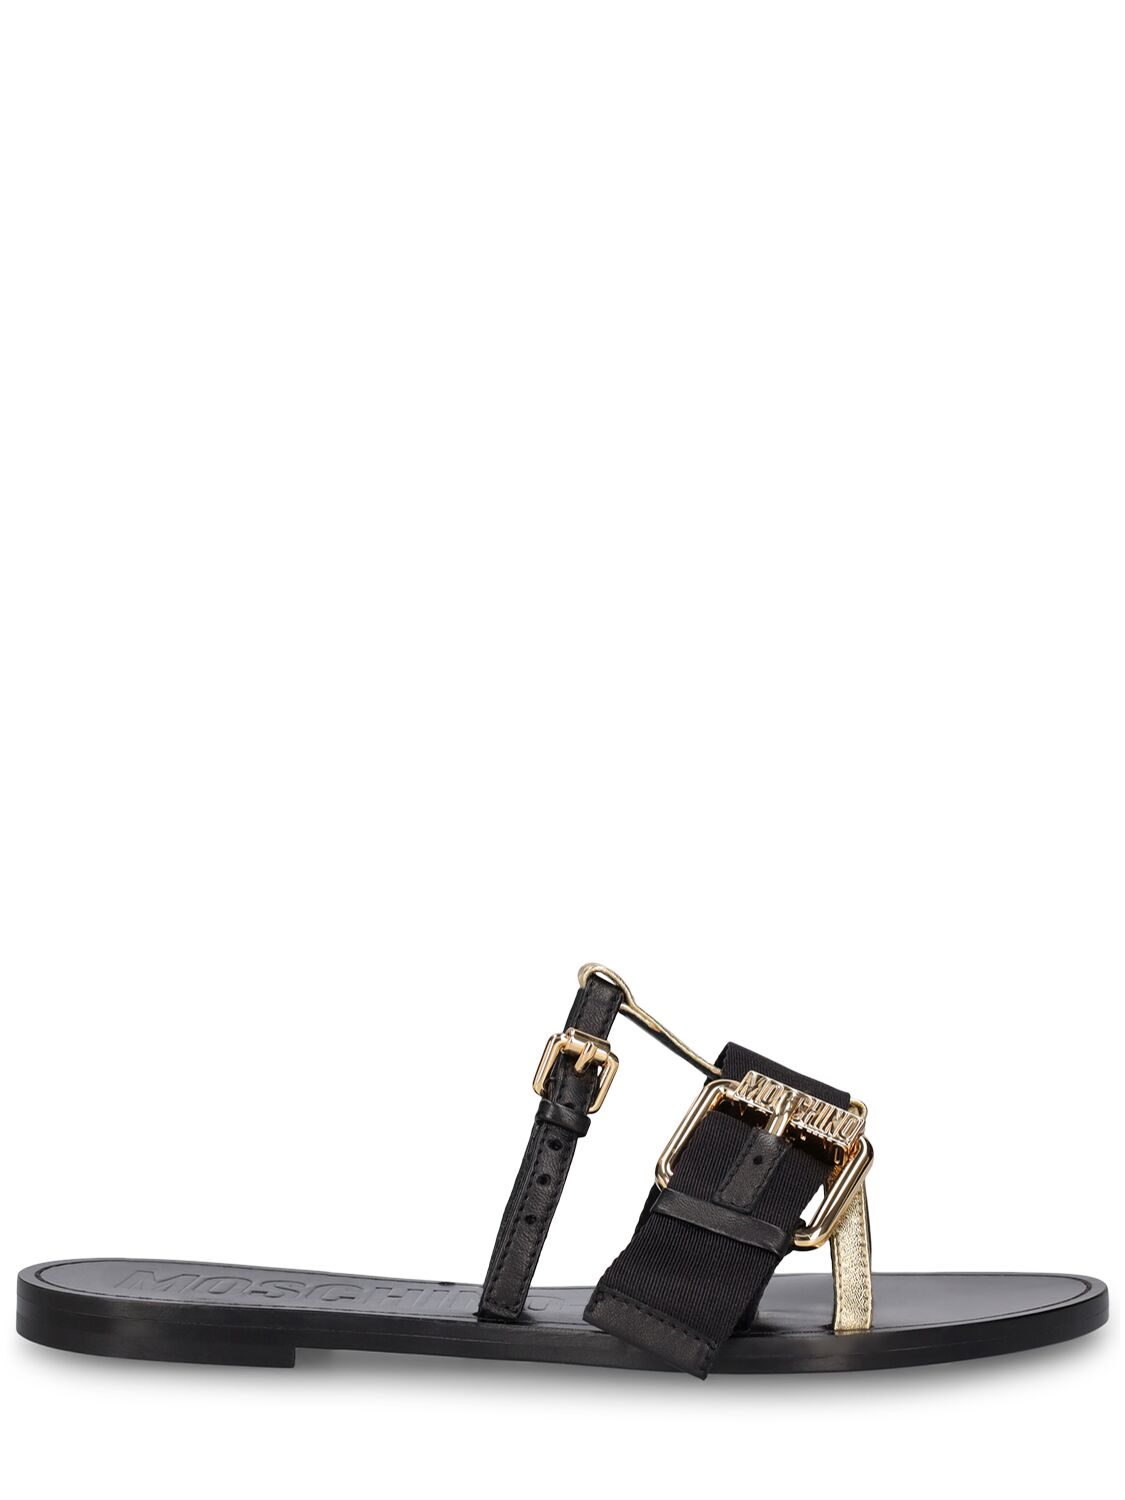 Moschino 5mm Leather Flat Sandals In Black